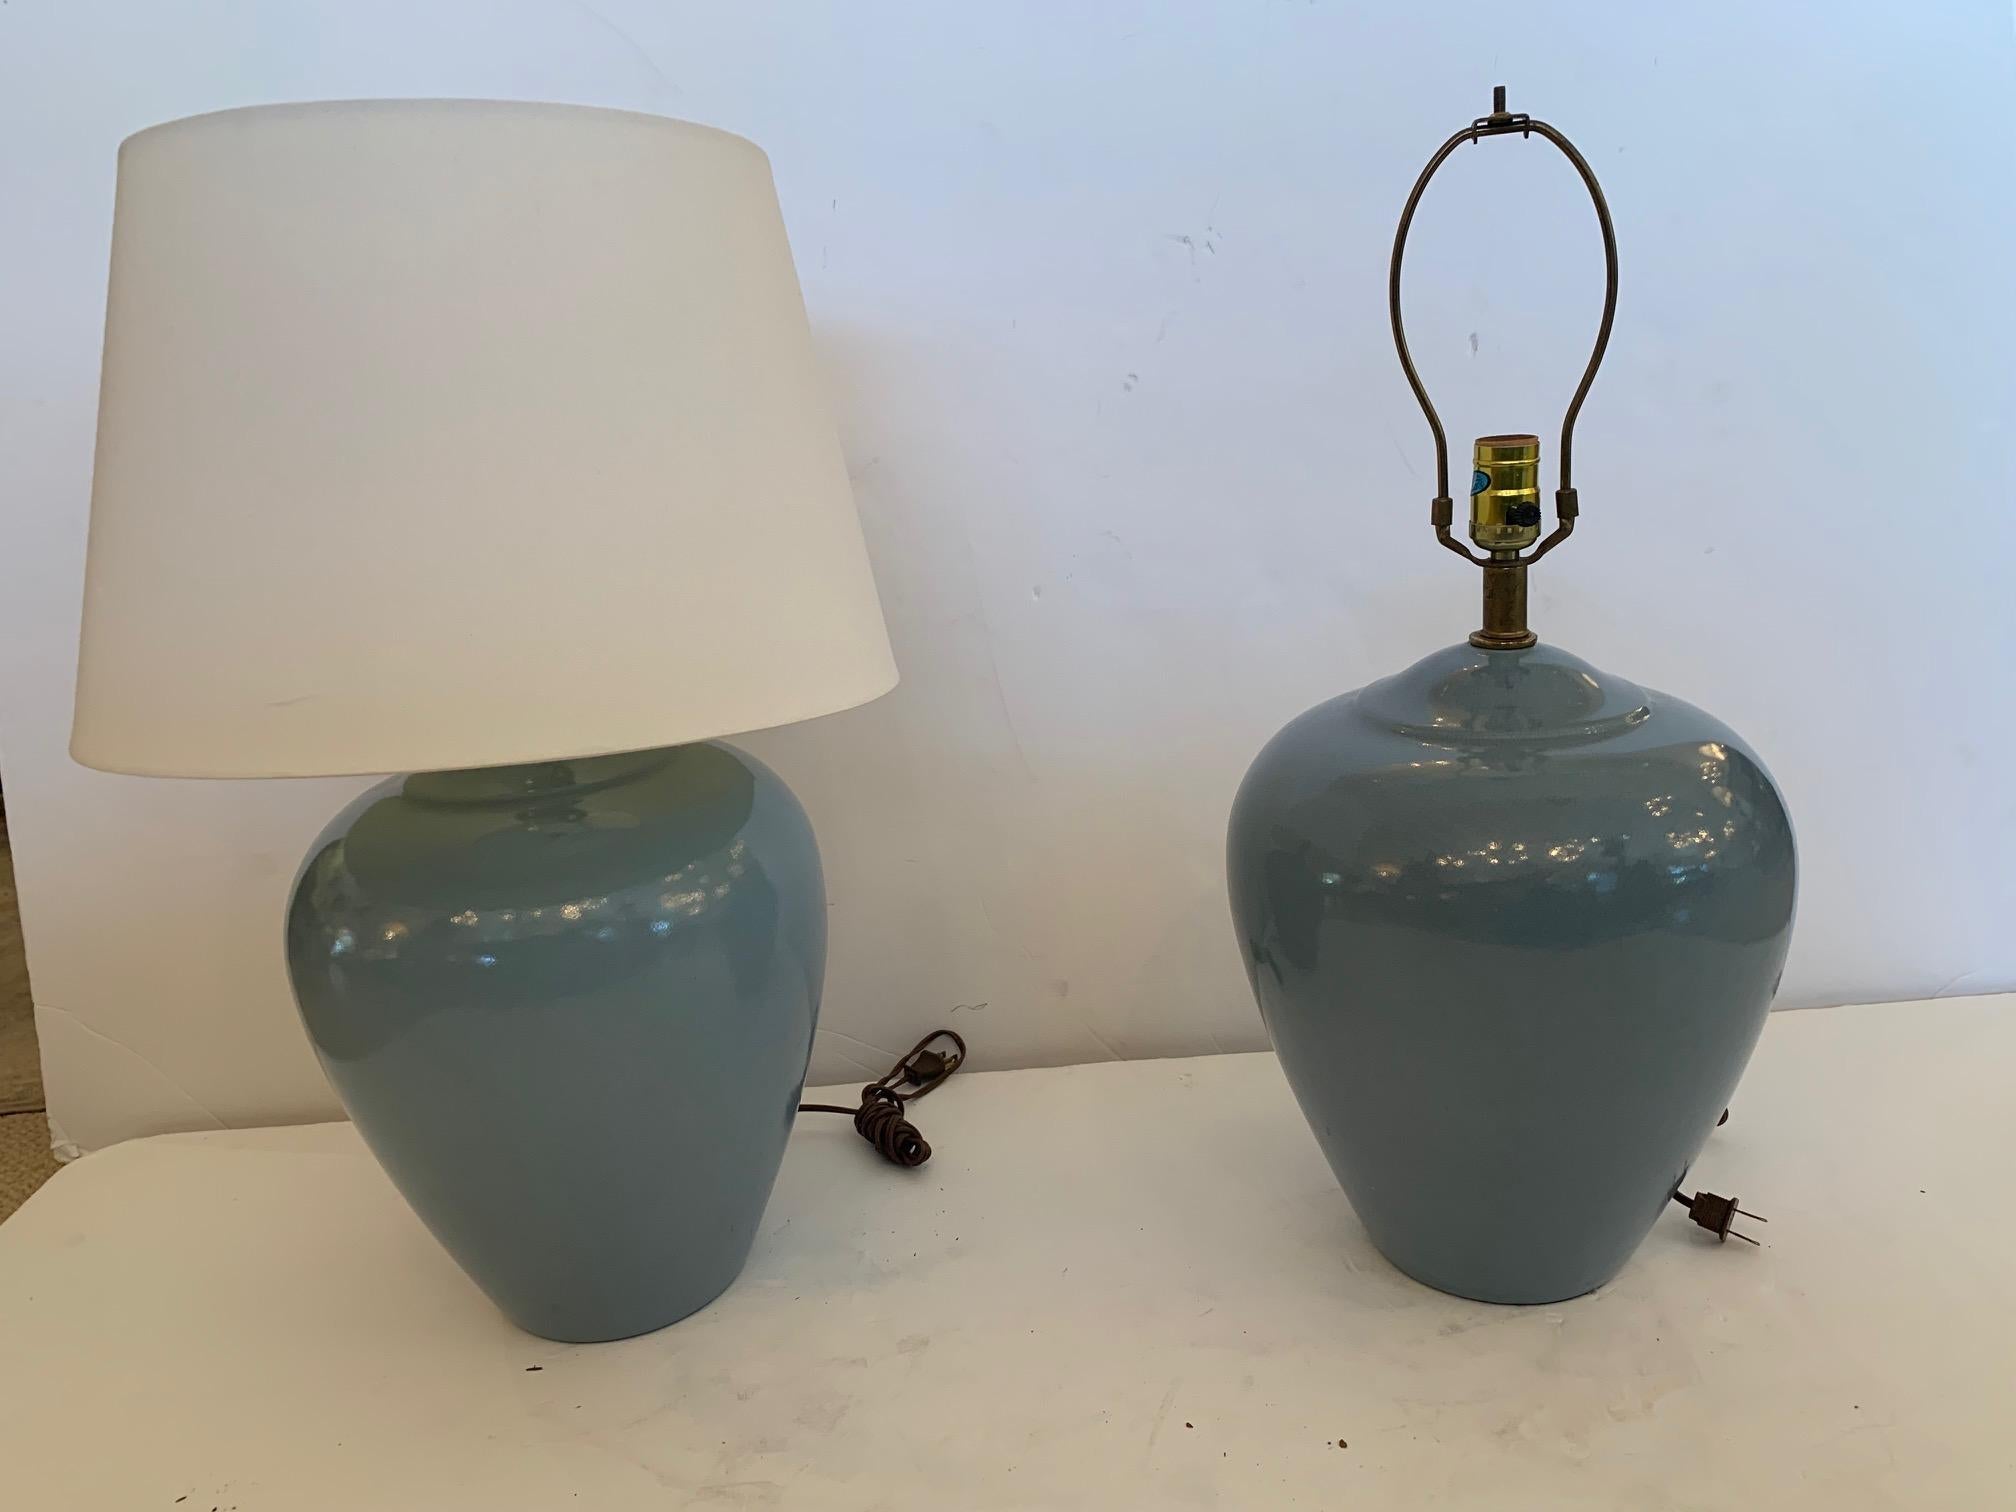 Lovely pair of Mid-Century Modern grayish blue pottery lamps with elegant urn shape and crazed surface. One lamp is a little bit darker than the other.
Shades not included.